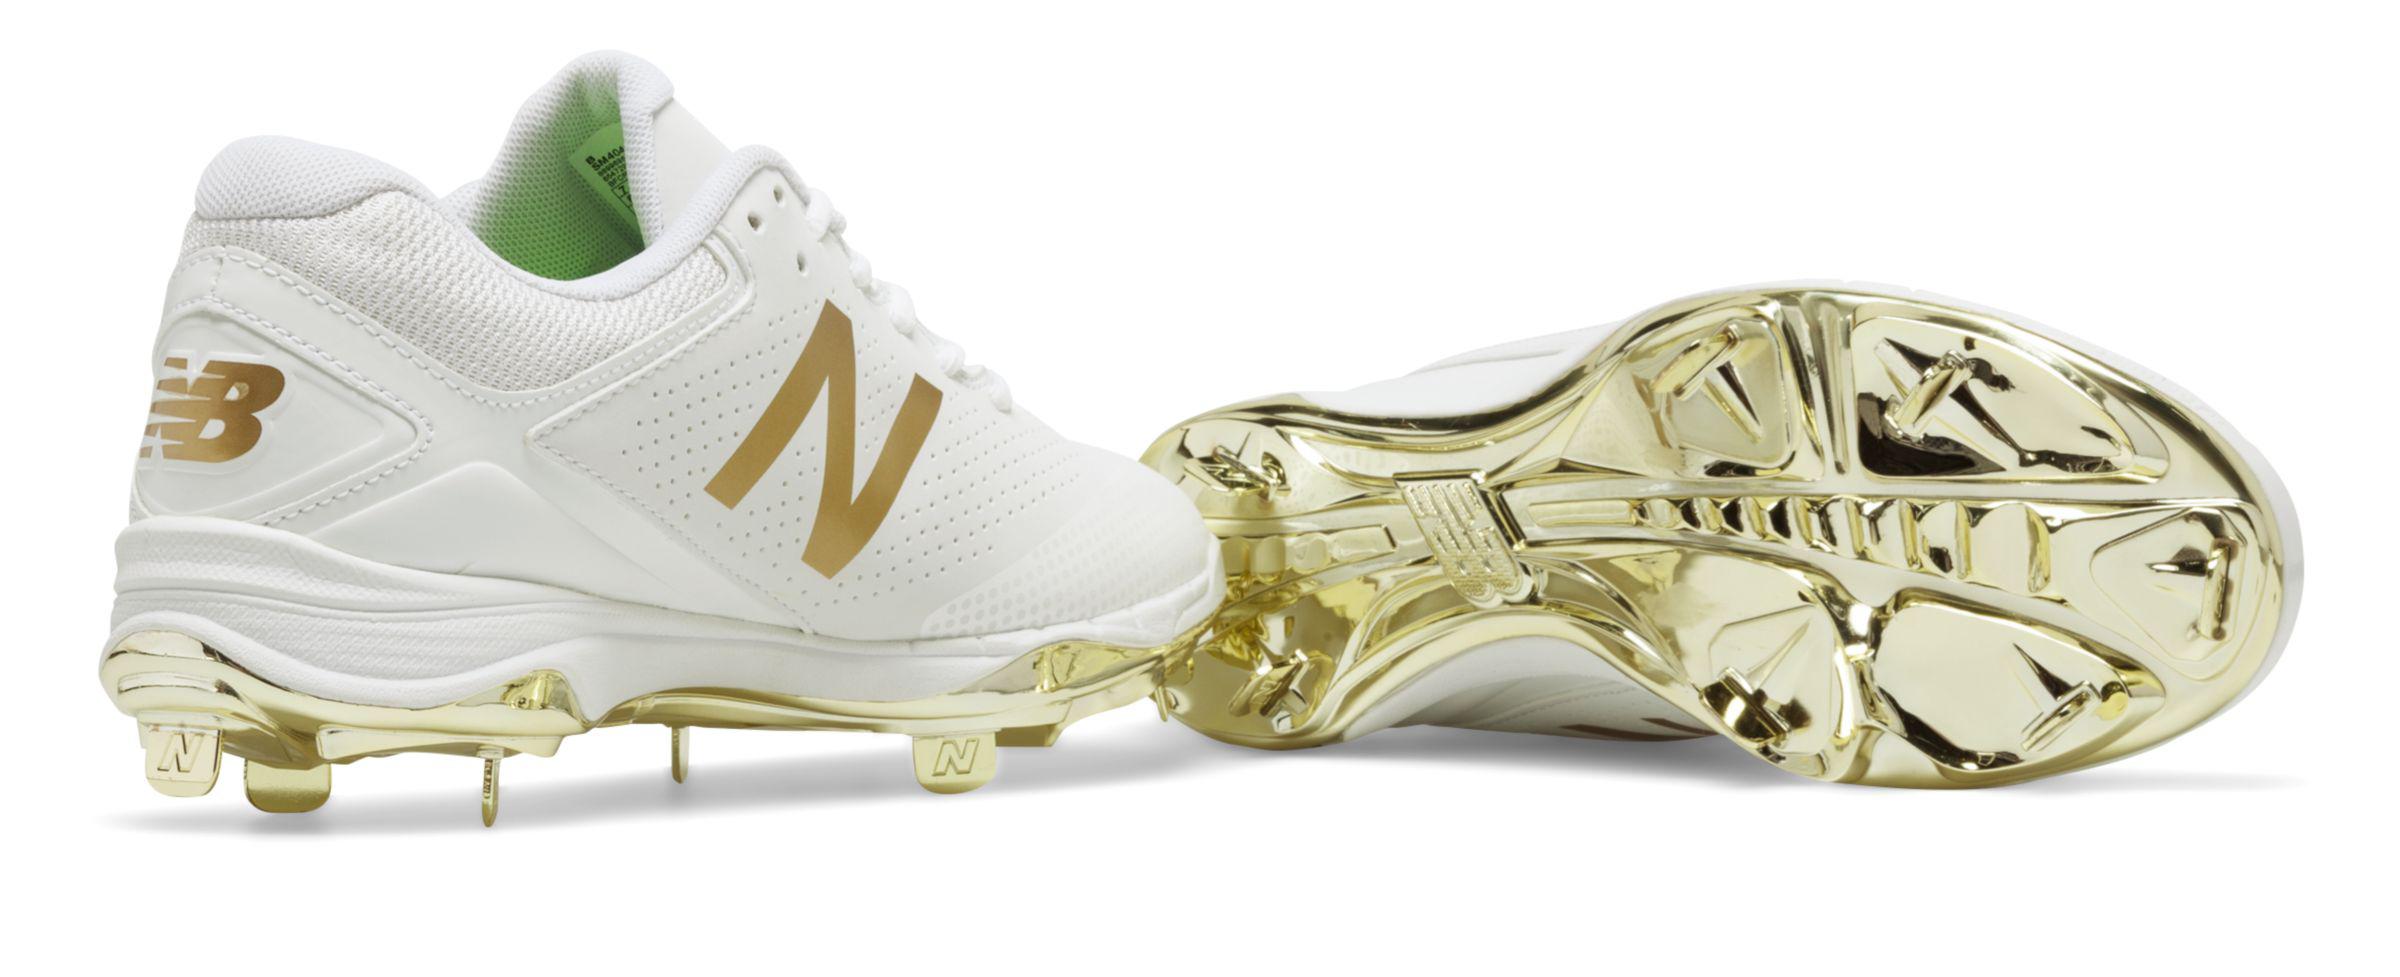 new balance gold plated cleats